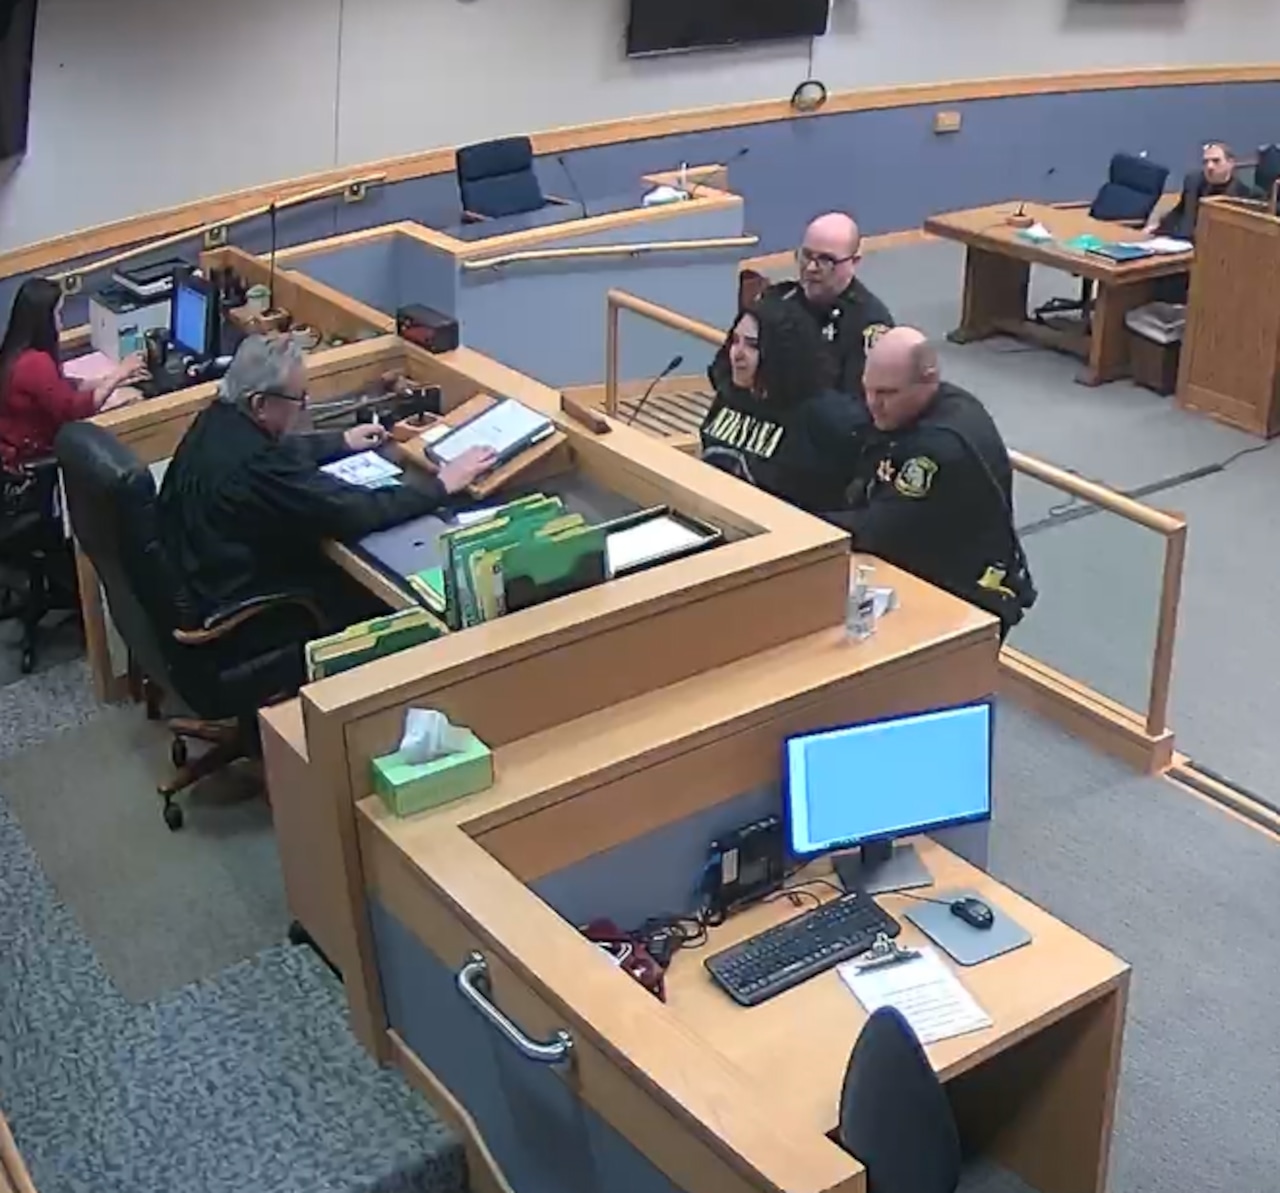 Bay City woman bolts from courtroom to avoid jail, injuring 2 officers [Video]